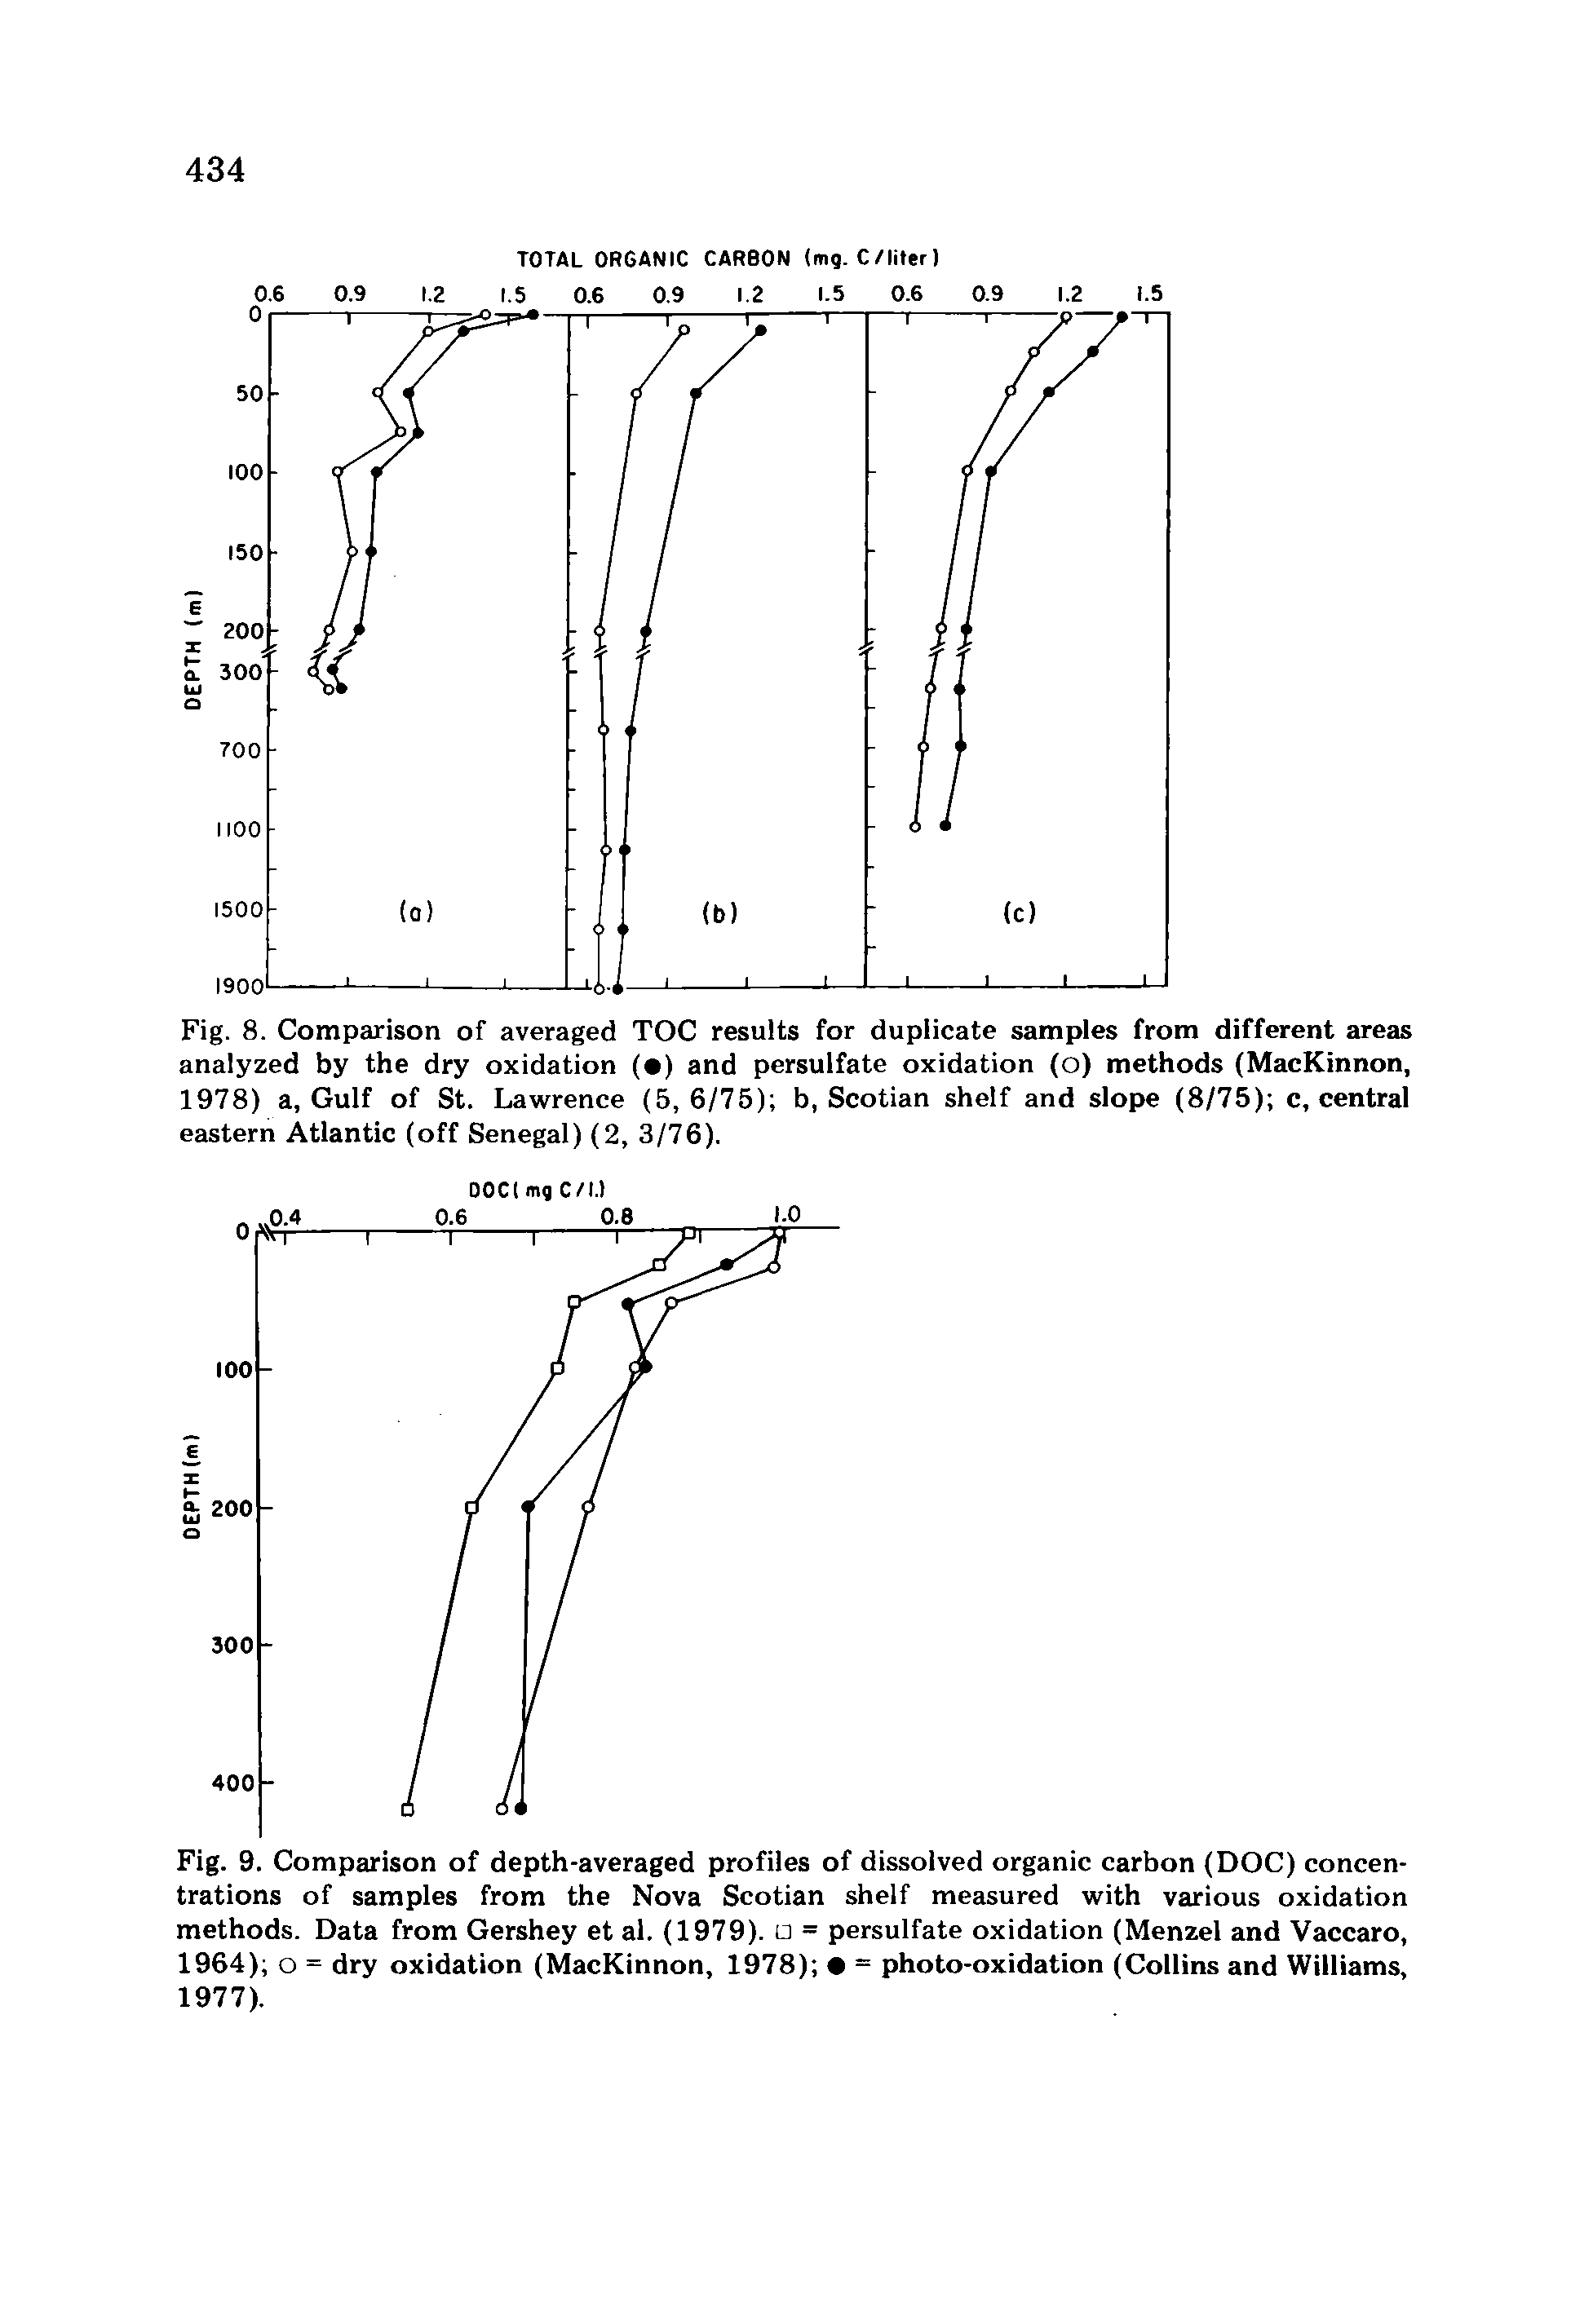 Fig. 8. Comparison of averaged TOC results for duplicate samples from different areas analyzed by the dry oxidation ( ) and persulfate oxidation (o) methods (MacKinnon, 1978) a, Gulf of St. Lawrence (5,6/75) b, Scotian shelf and slope (8/75) c, central eastern Atlantic (off Senegal) (2, 3/76).